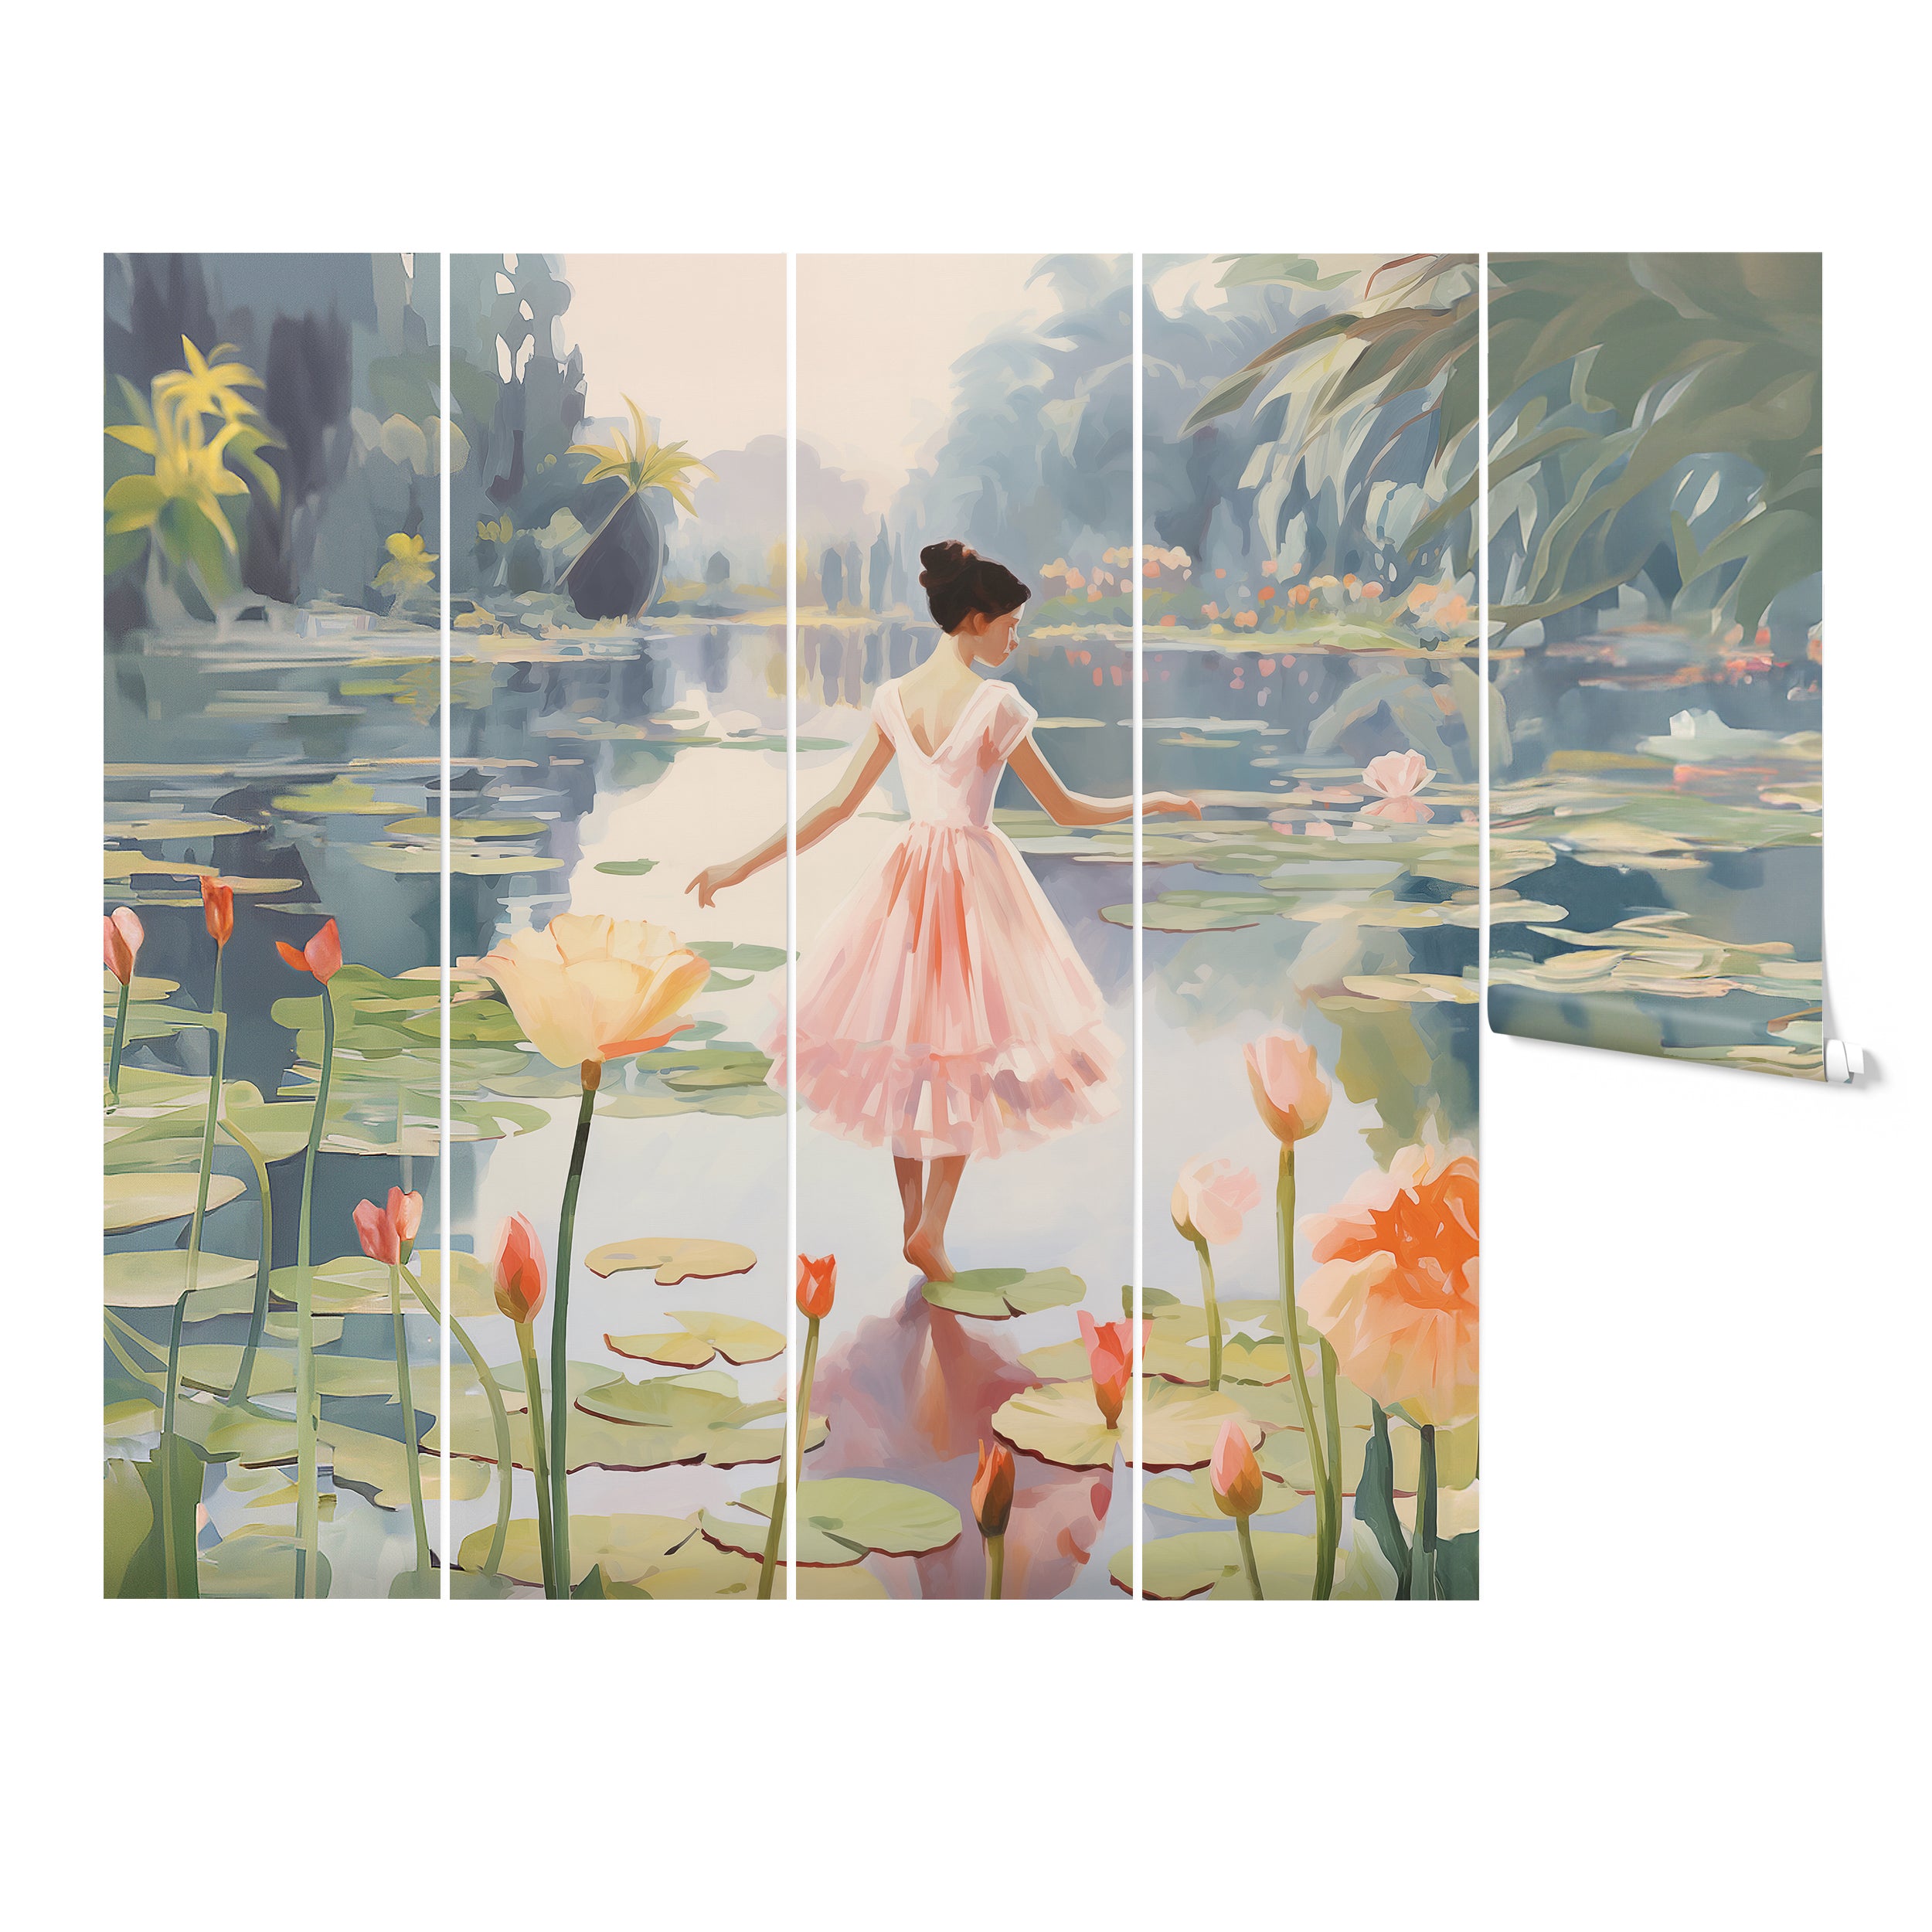 Five-panel wall mural depicting a scene of a young girl amidst a vibrant lily pond, with flowers and foliage in soft pastel colors.